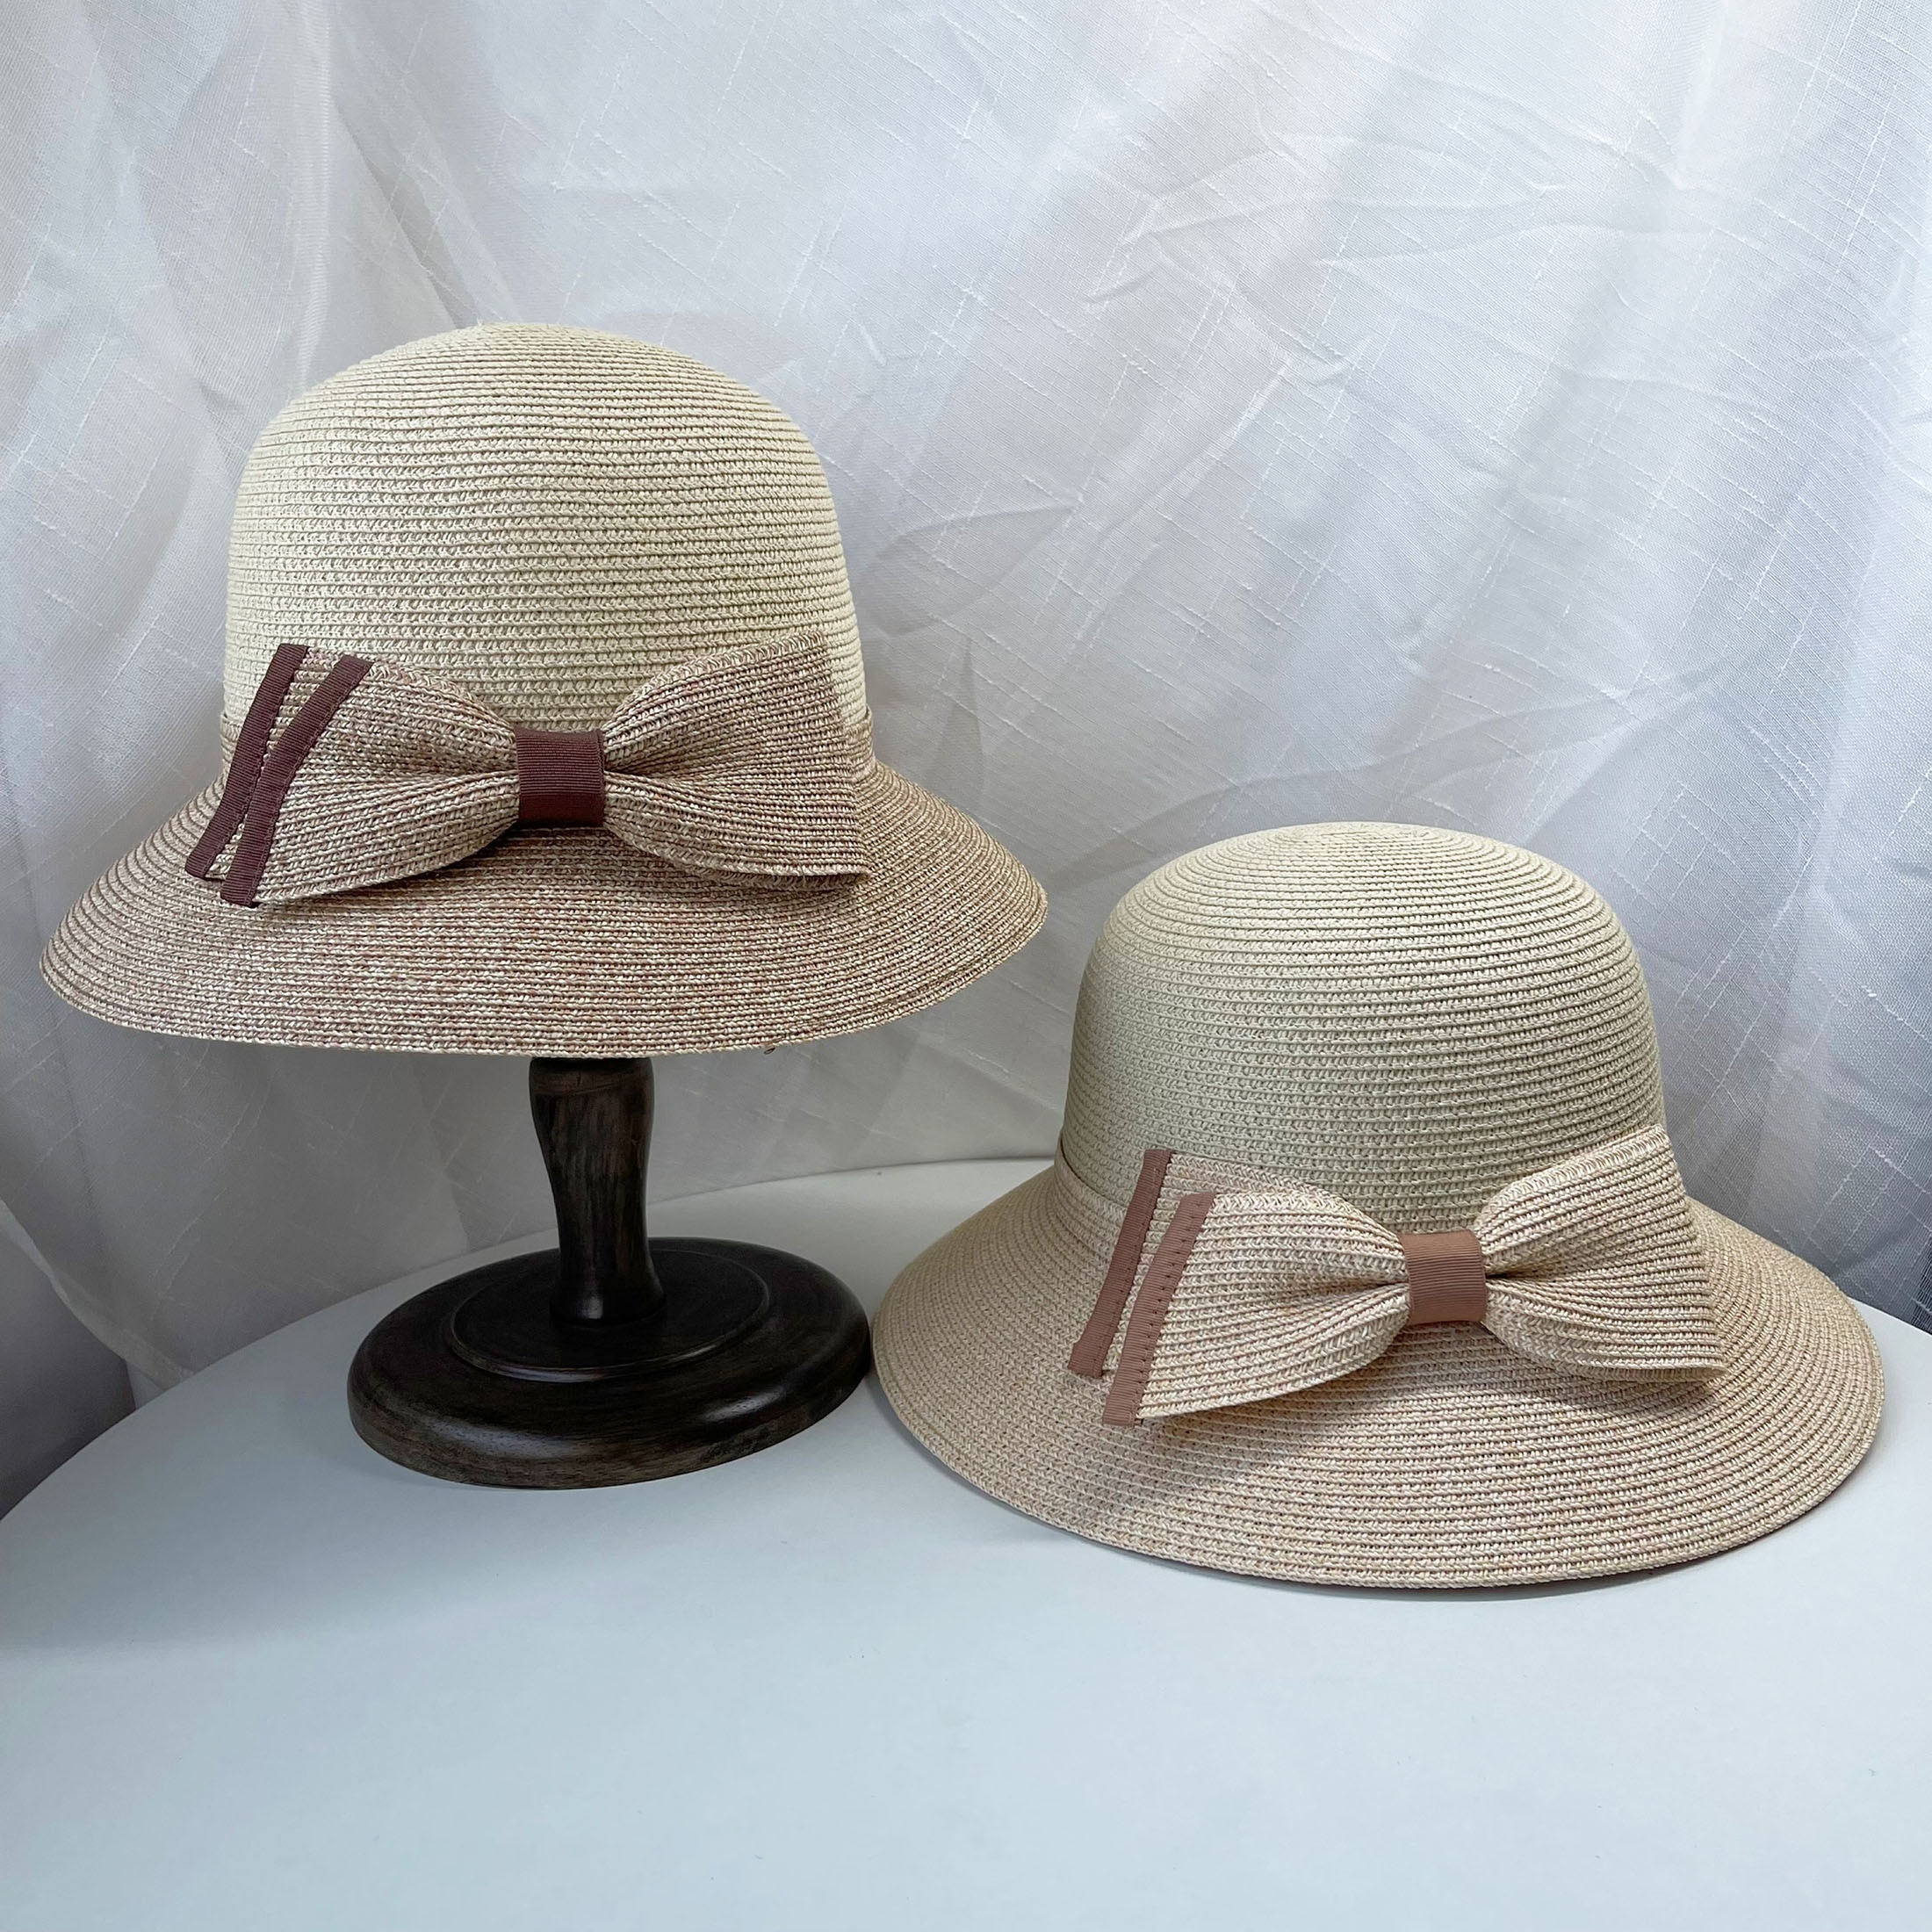 Stylish and Sun-Protective Bucket Hat for Women